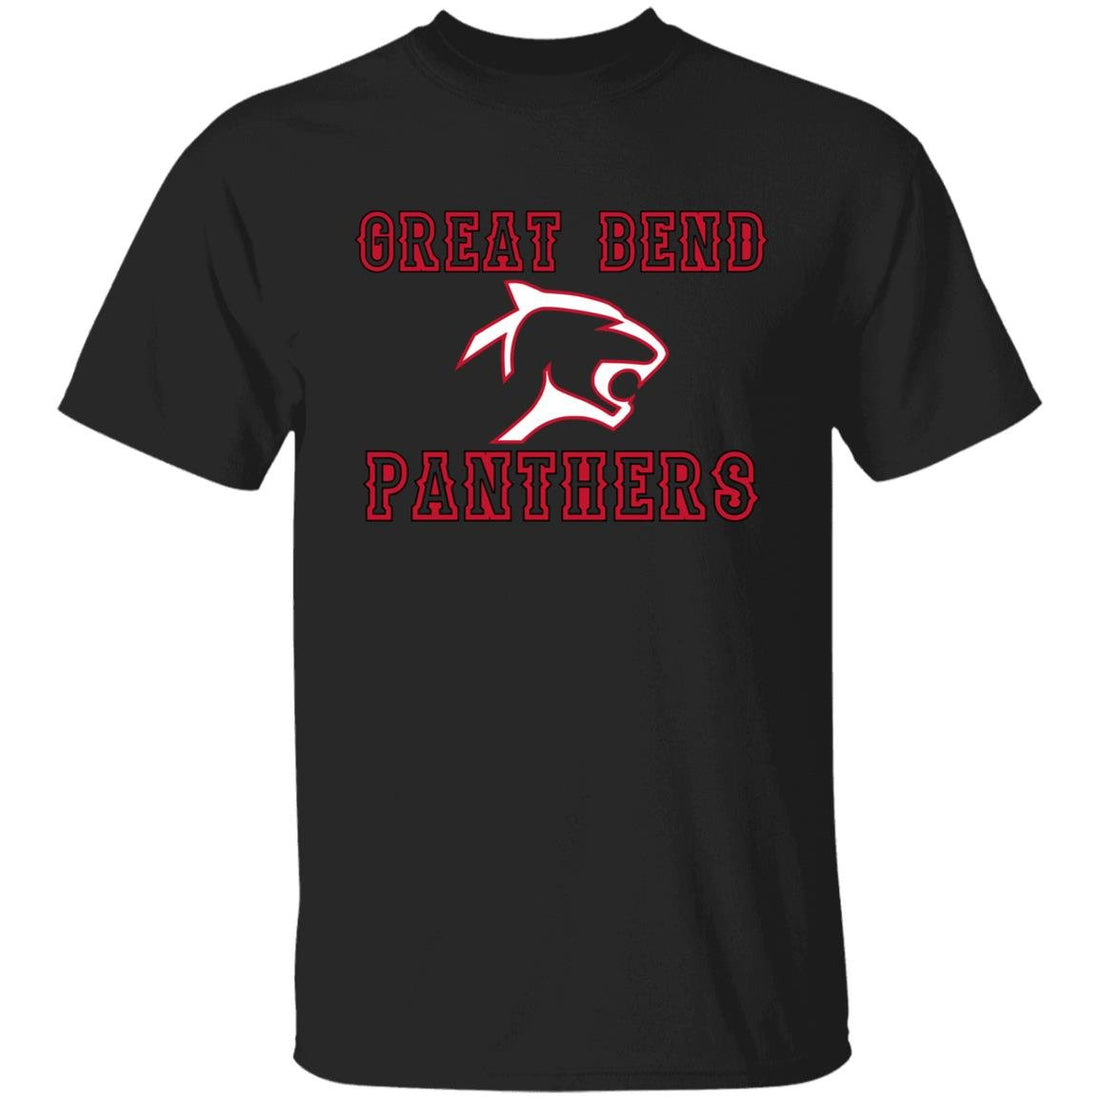 Youth Great Bend Panthers Tee - T-Shirts - Positively Sassy - Youth Great Bend Panthers Tee